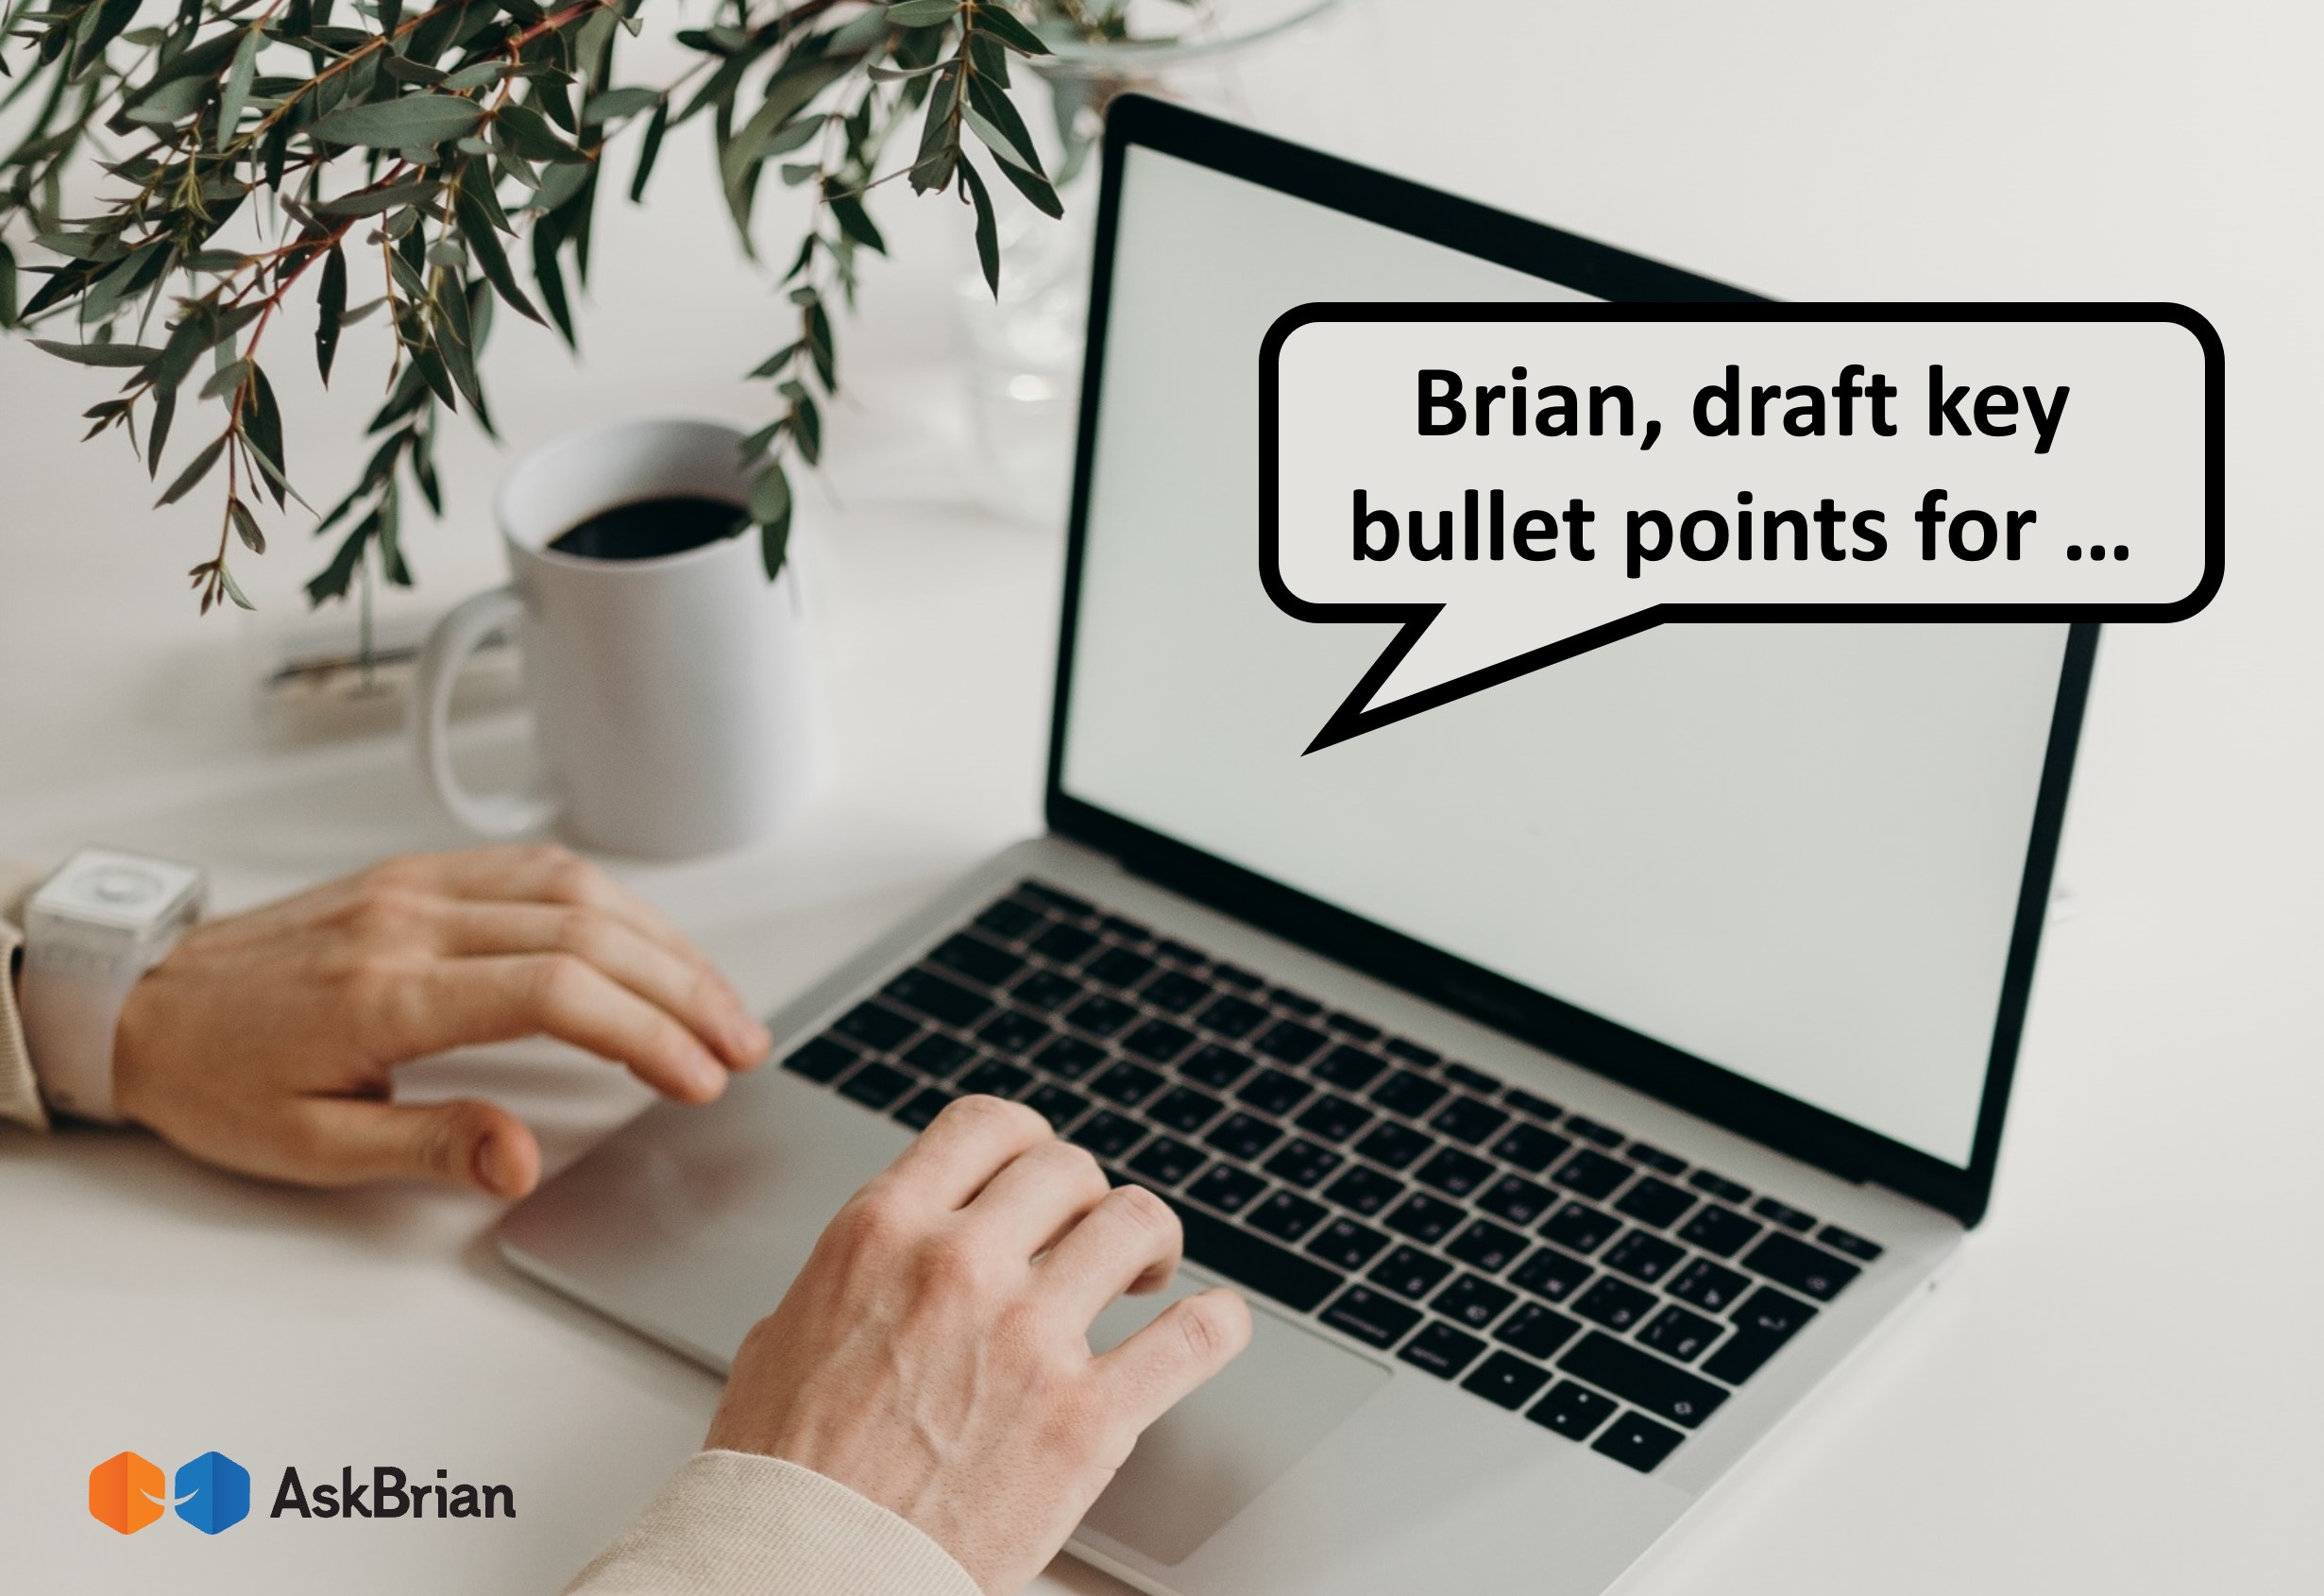 AskBrian launched a new AI technology